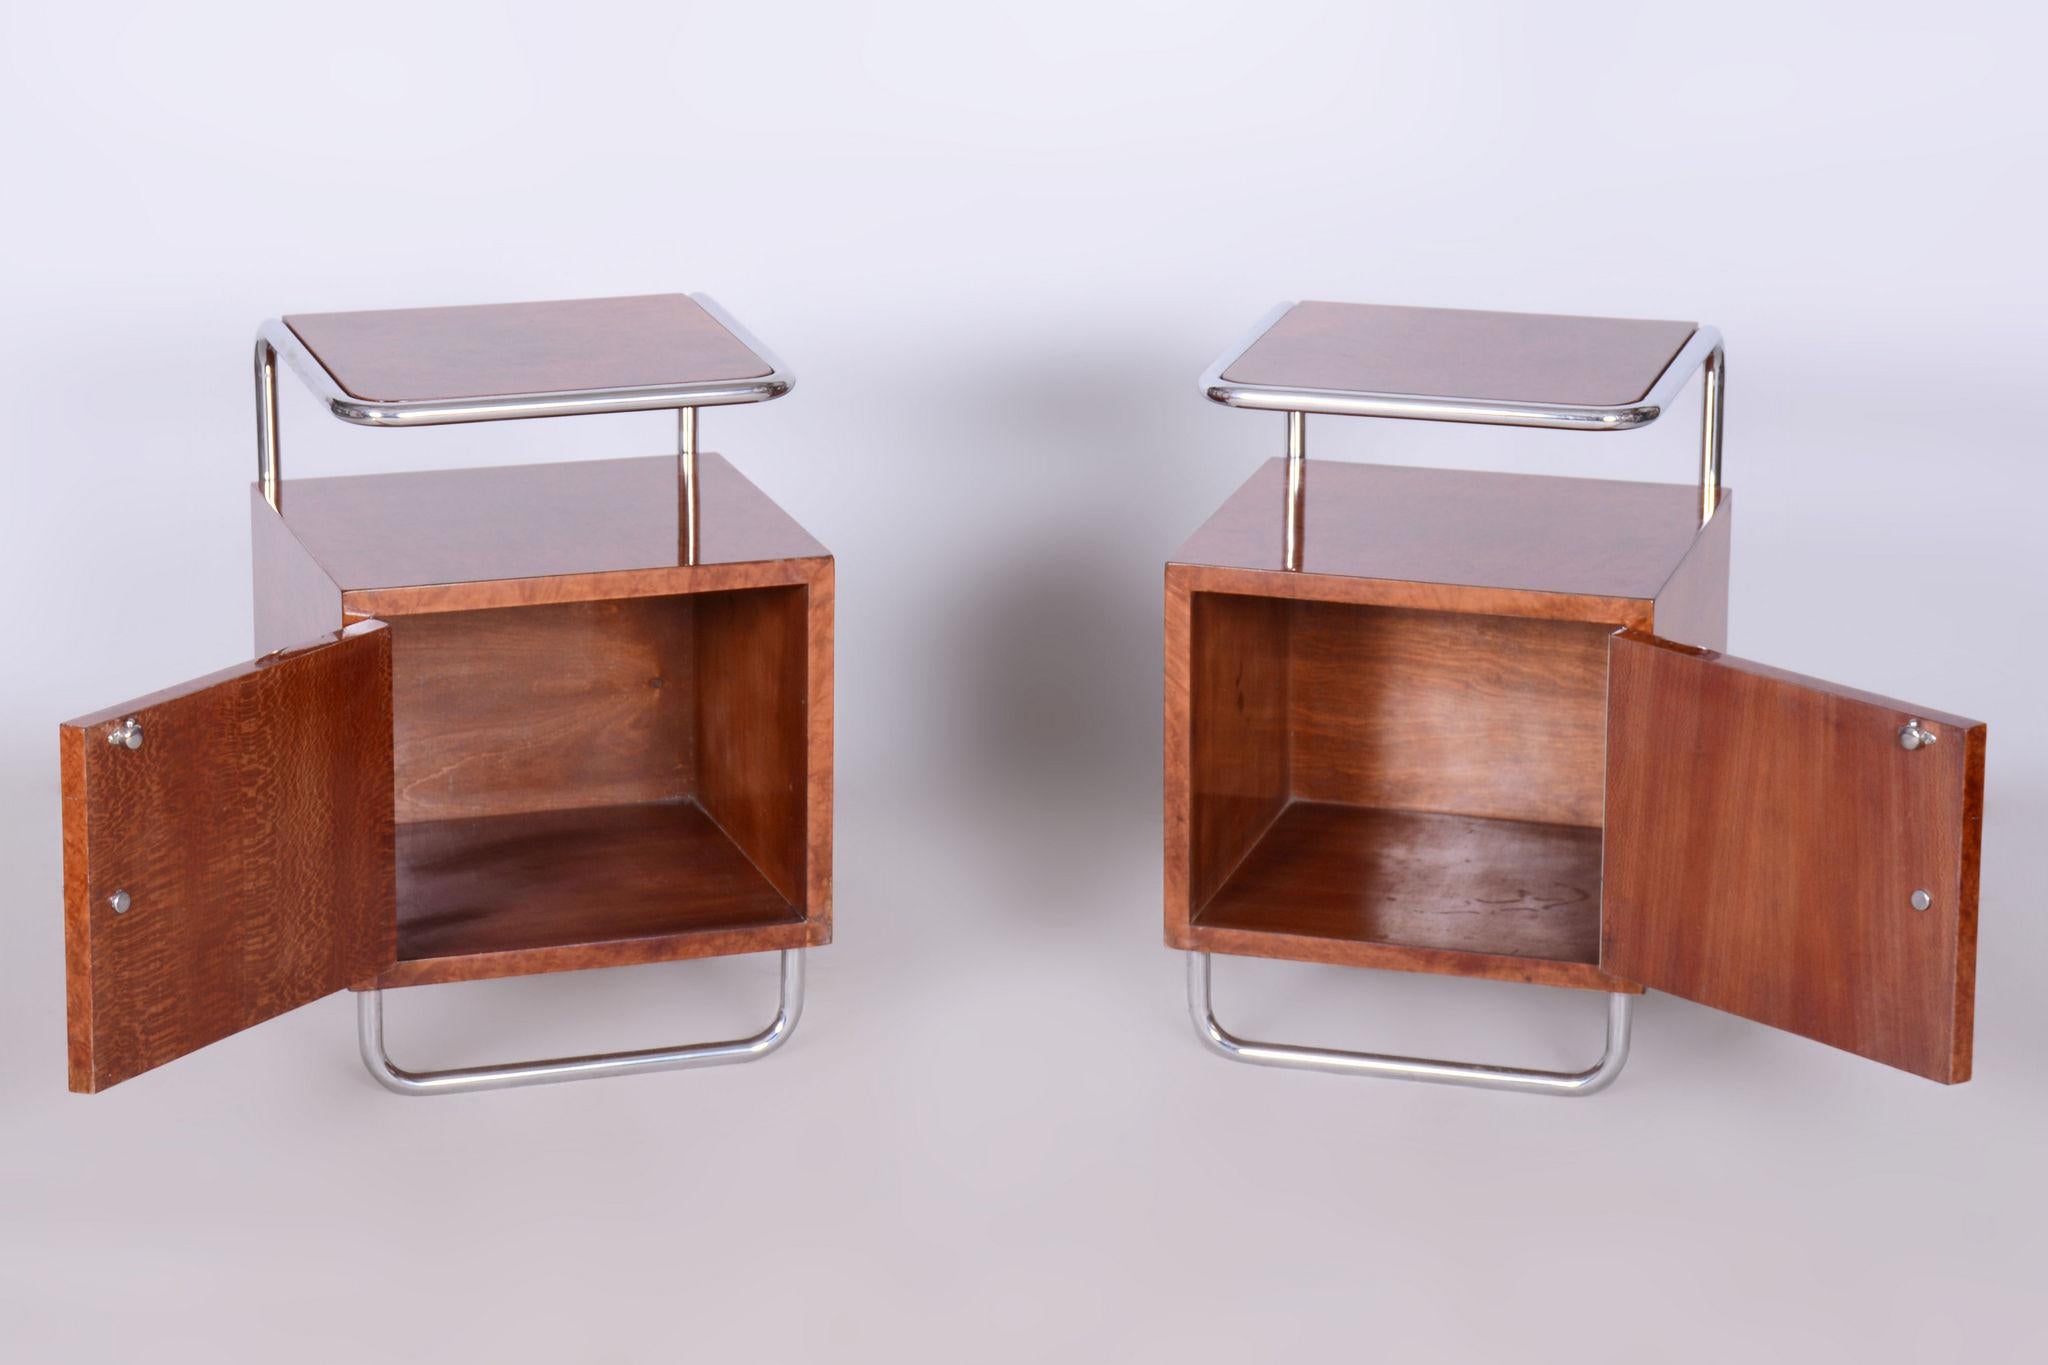 Set of Two Restored Bauhaus Bed-Side Tables, by H. Gottwald, Czech, 1930s In Good Condition For Sale In Horomerice, CZ